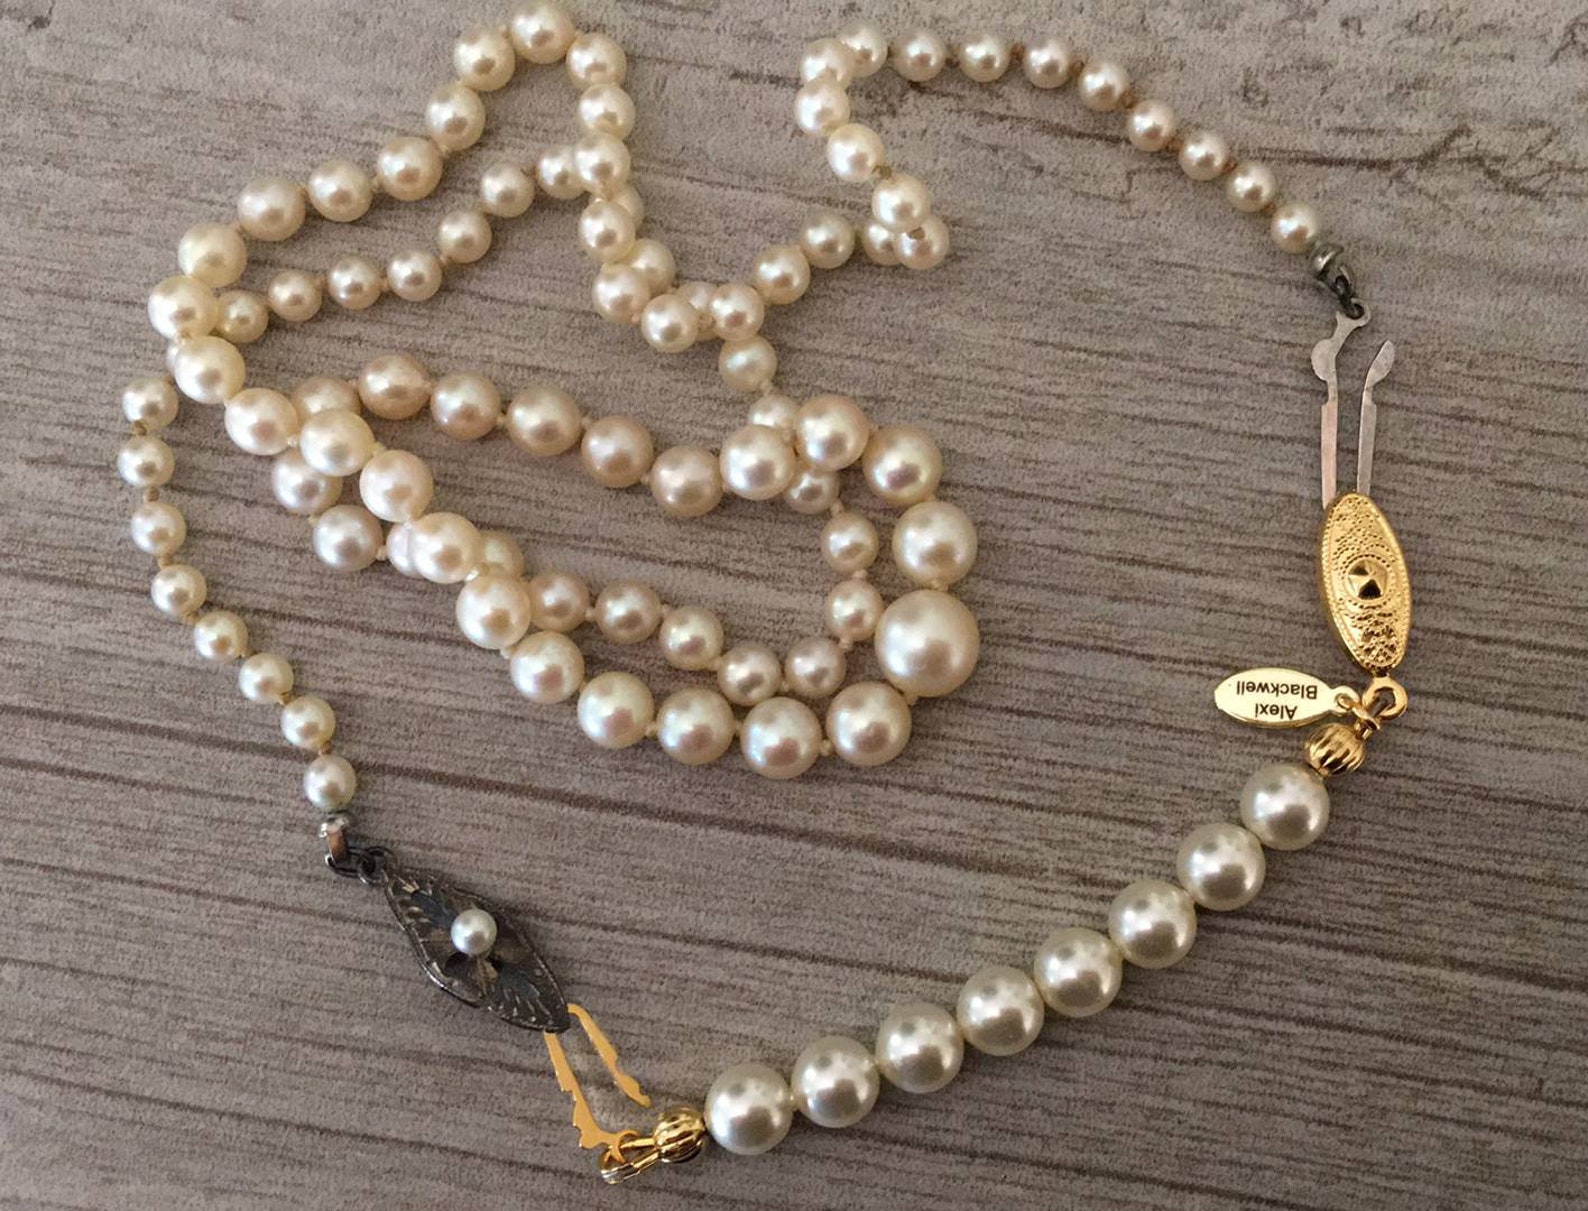 Pearl Necklace Extender fish hook clasp in Silver or Gold a | Etsy